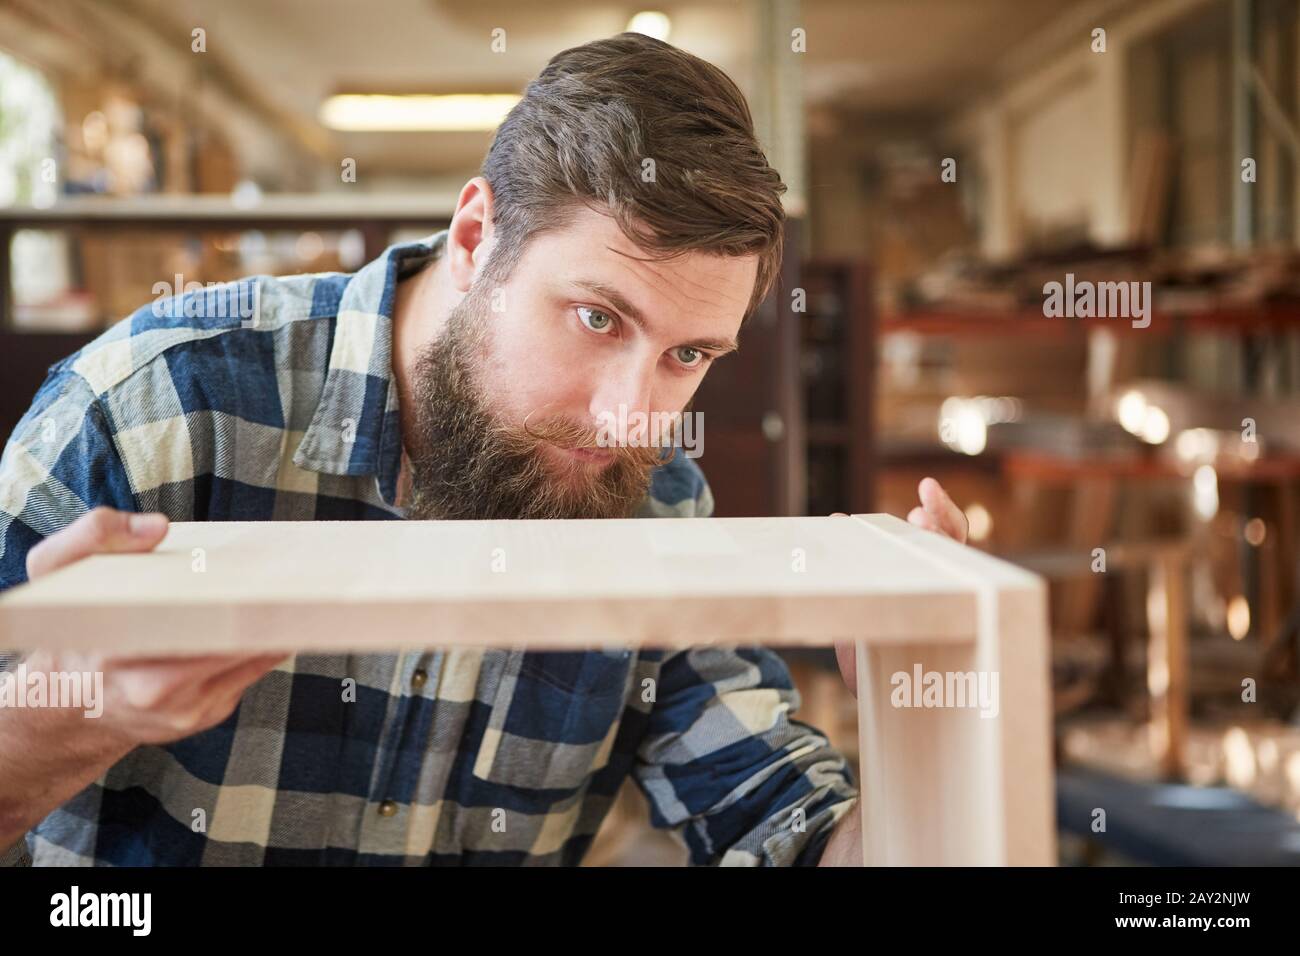 Carpenter in training builds a wooden shelf in a carpentry or joinery shop Stock Photo